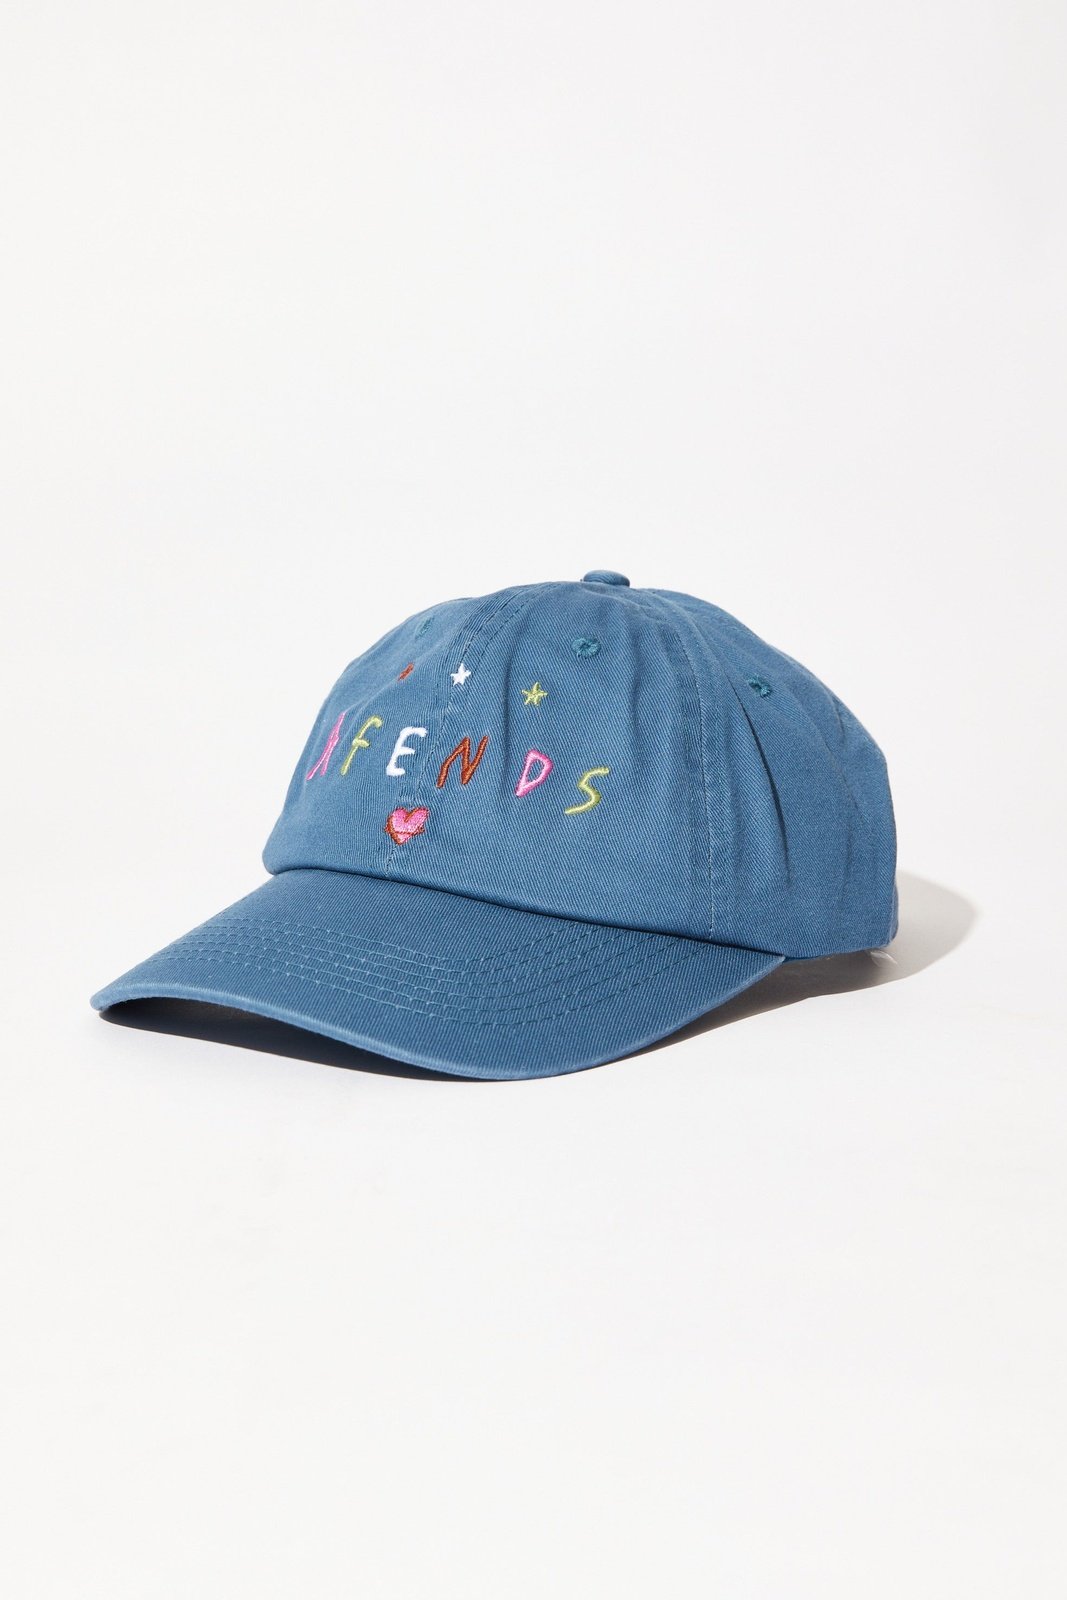 AFENDS Funhouse panelled cap - Lake